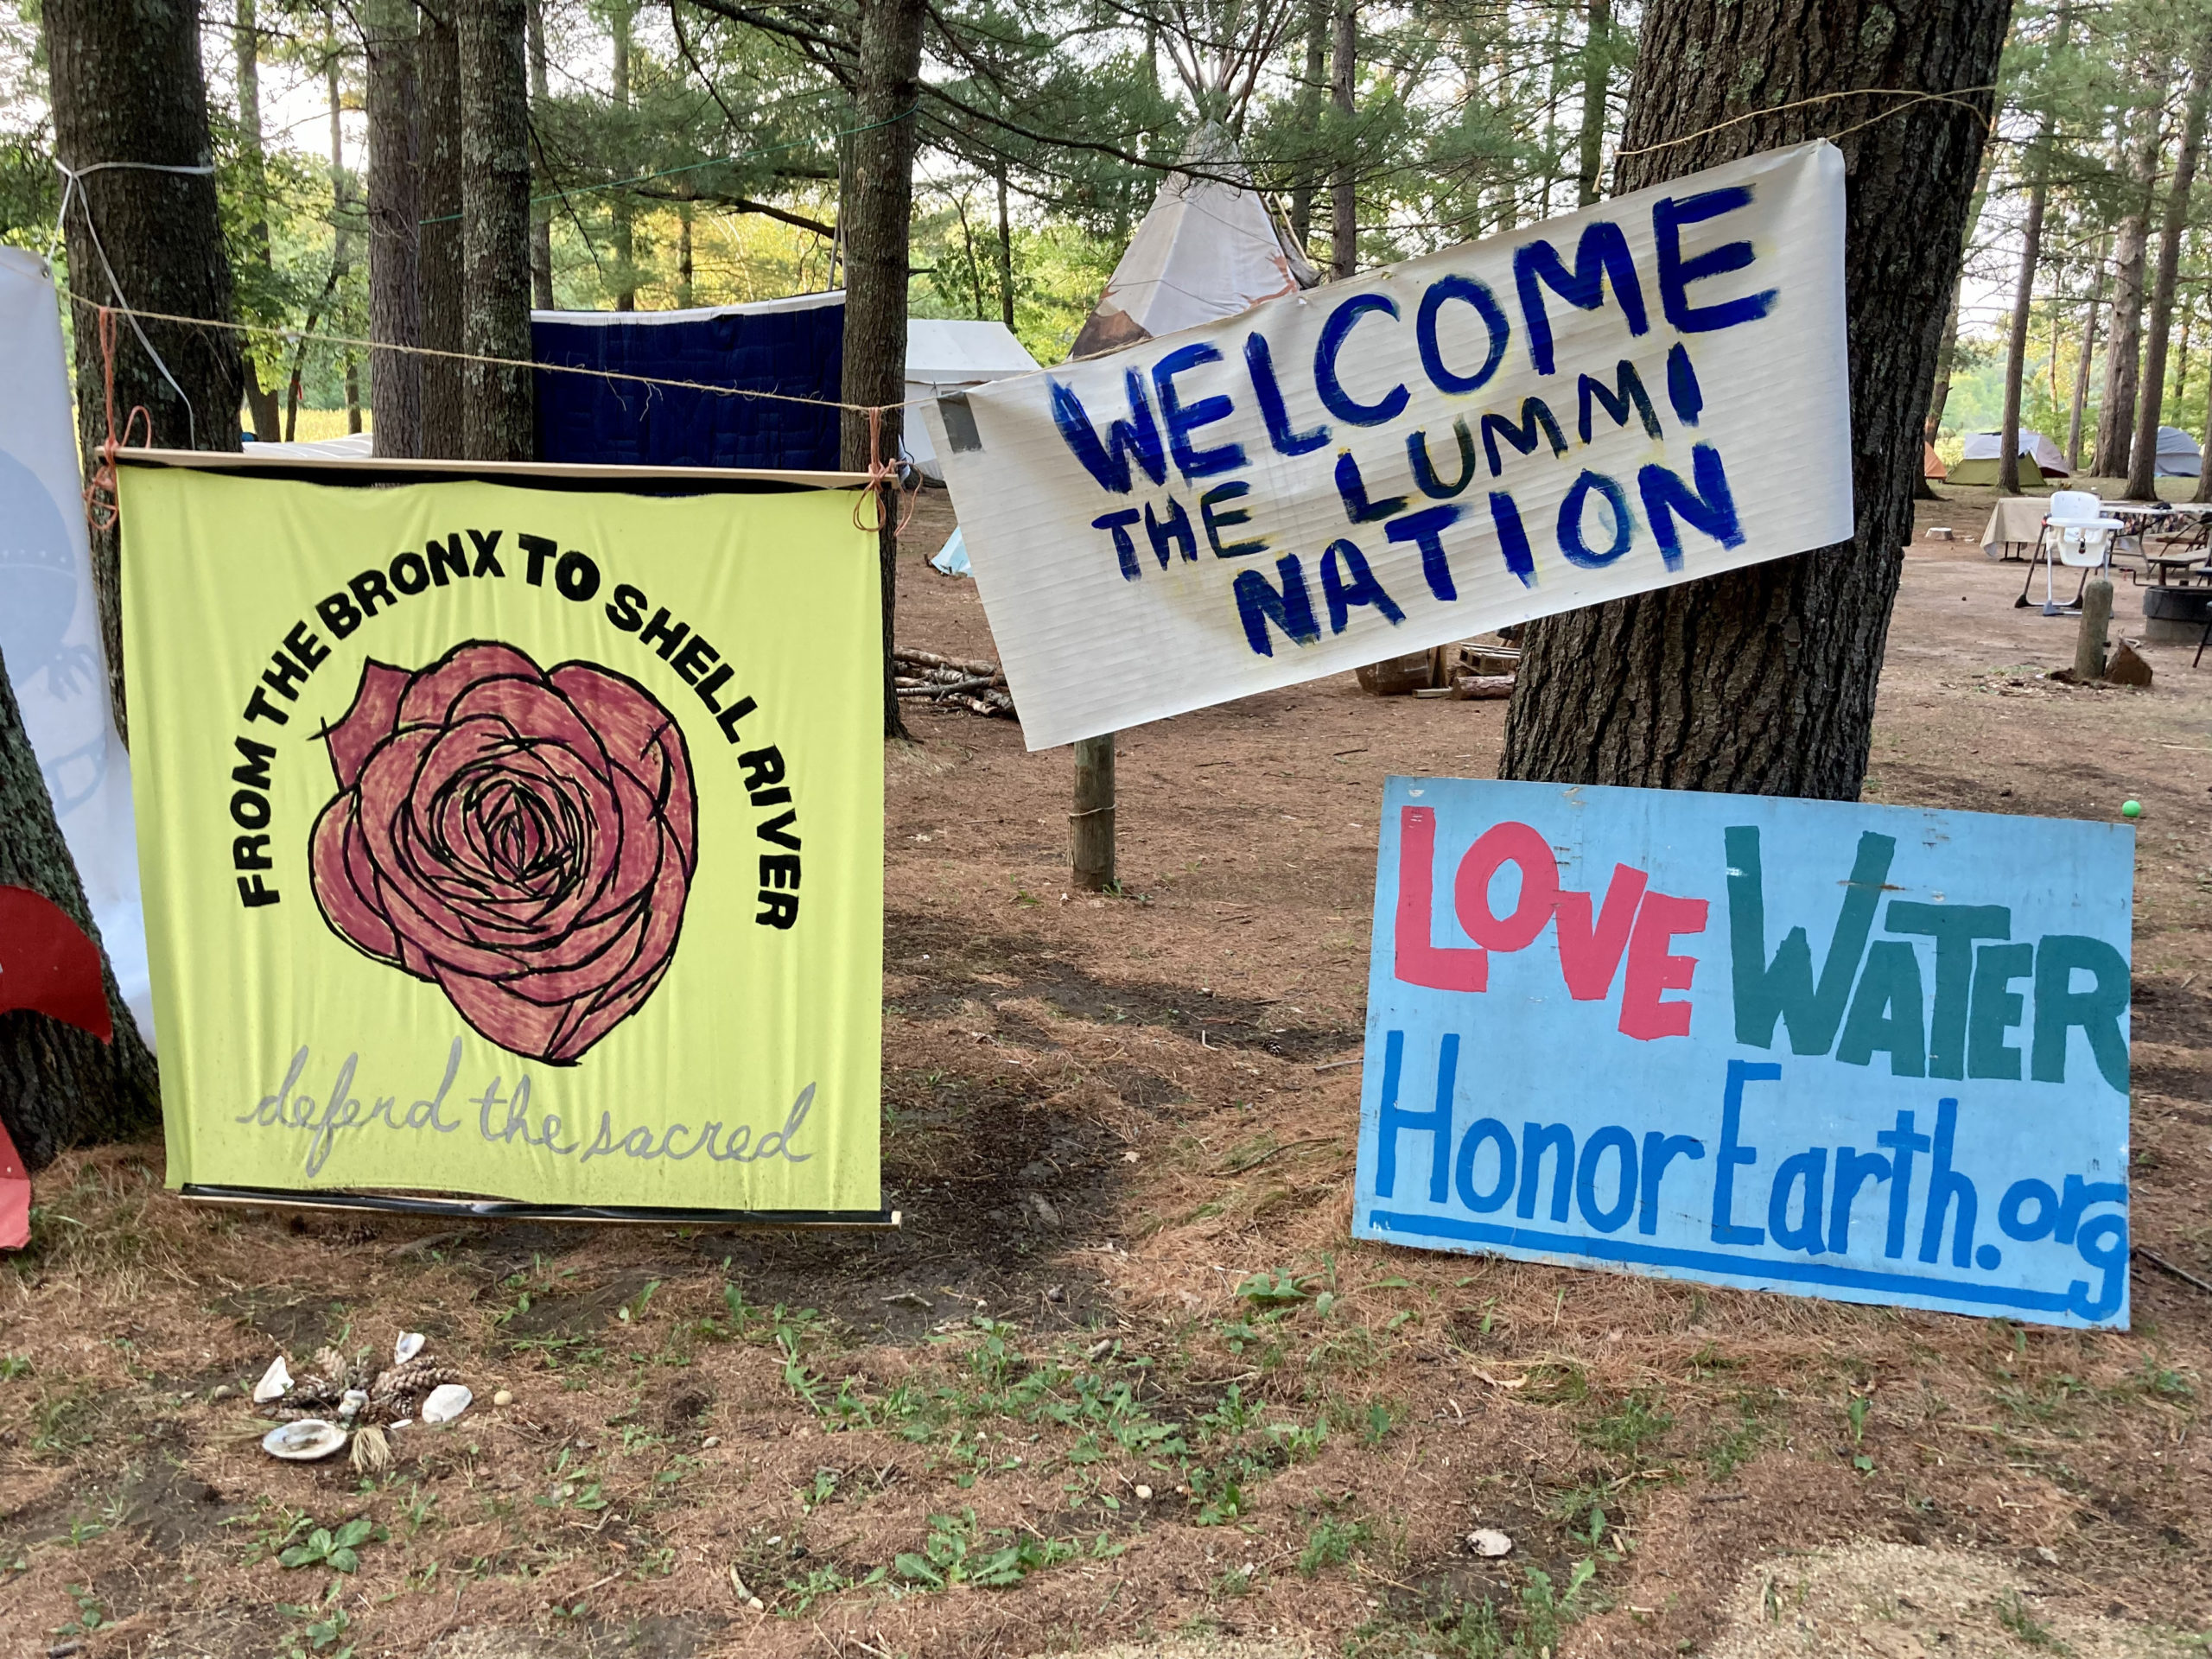 Signs at the camp read, from left to right, “From the Bronx to Shell River: Defend the Sacred,” “Welcome the Lummi Nation” and “Love Water: HonorEarth.org”